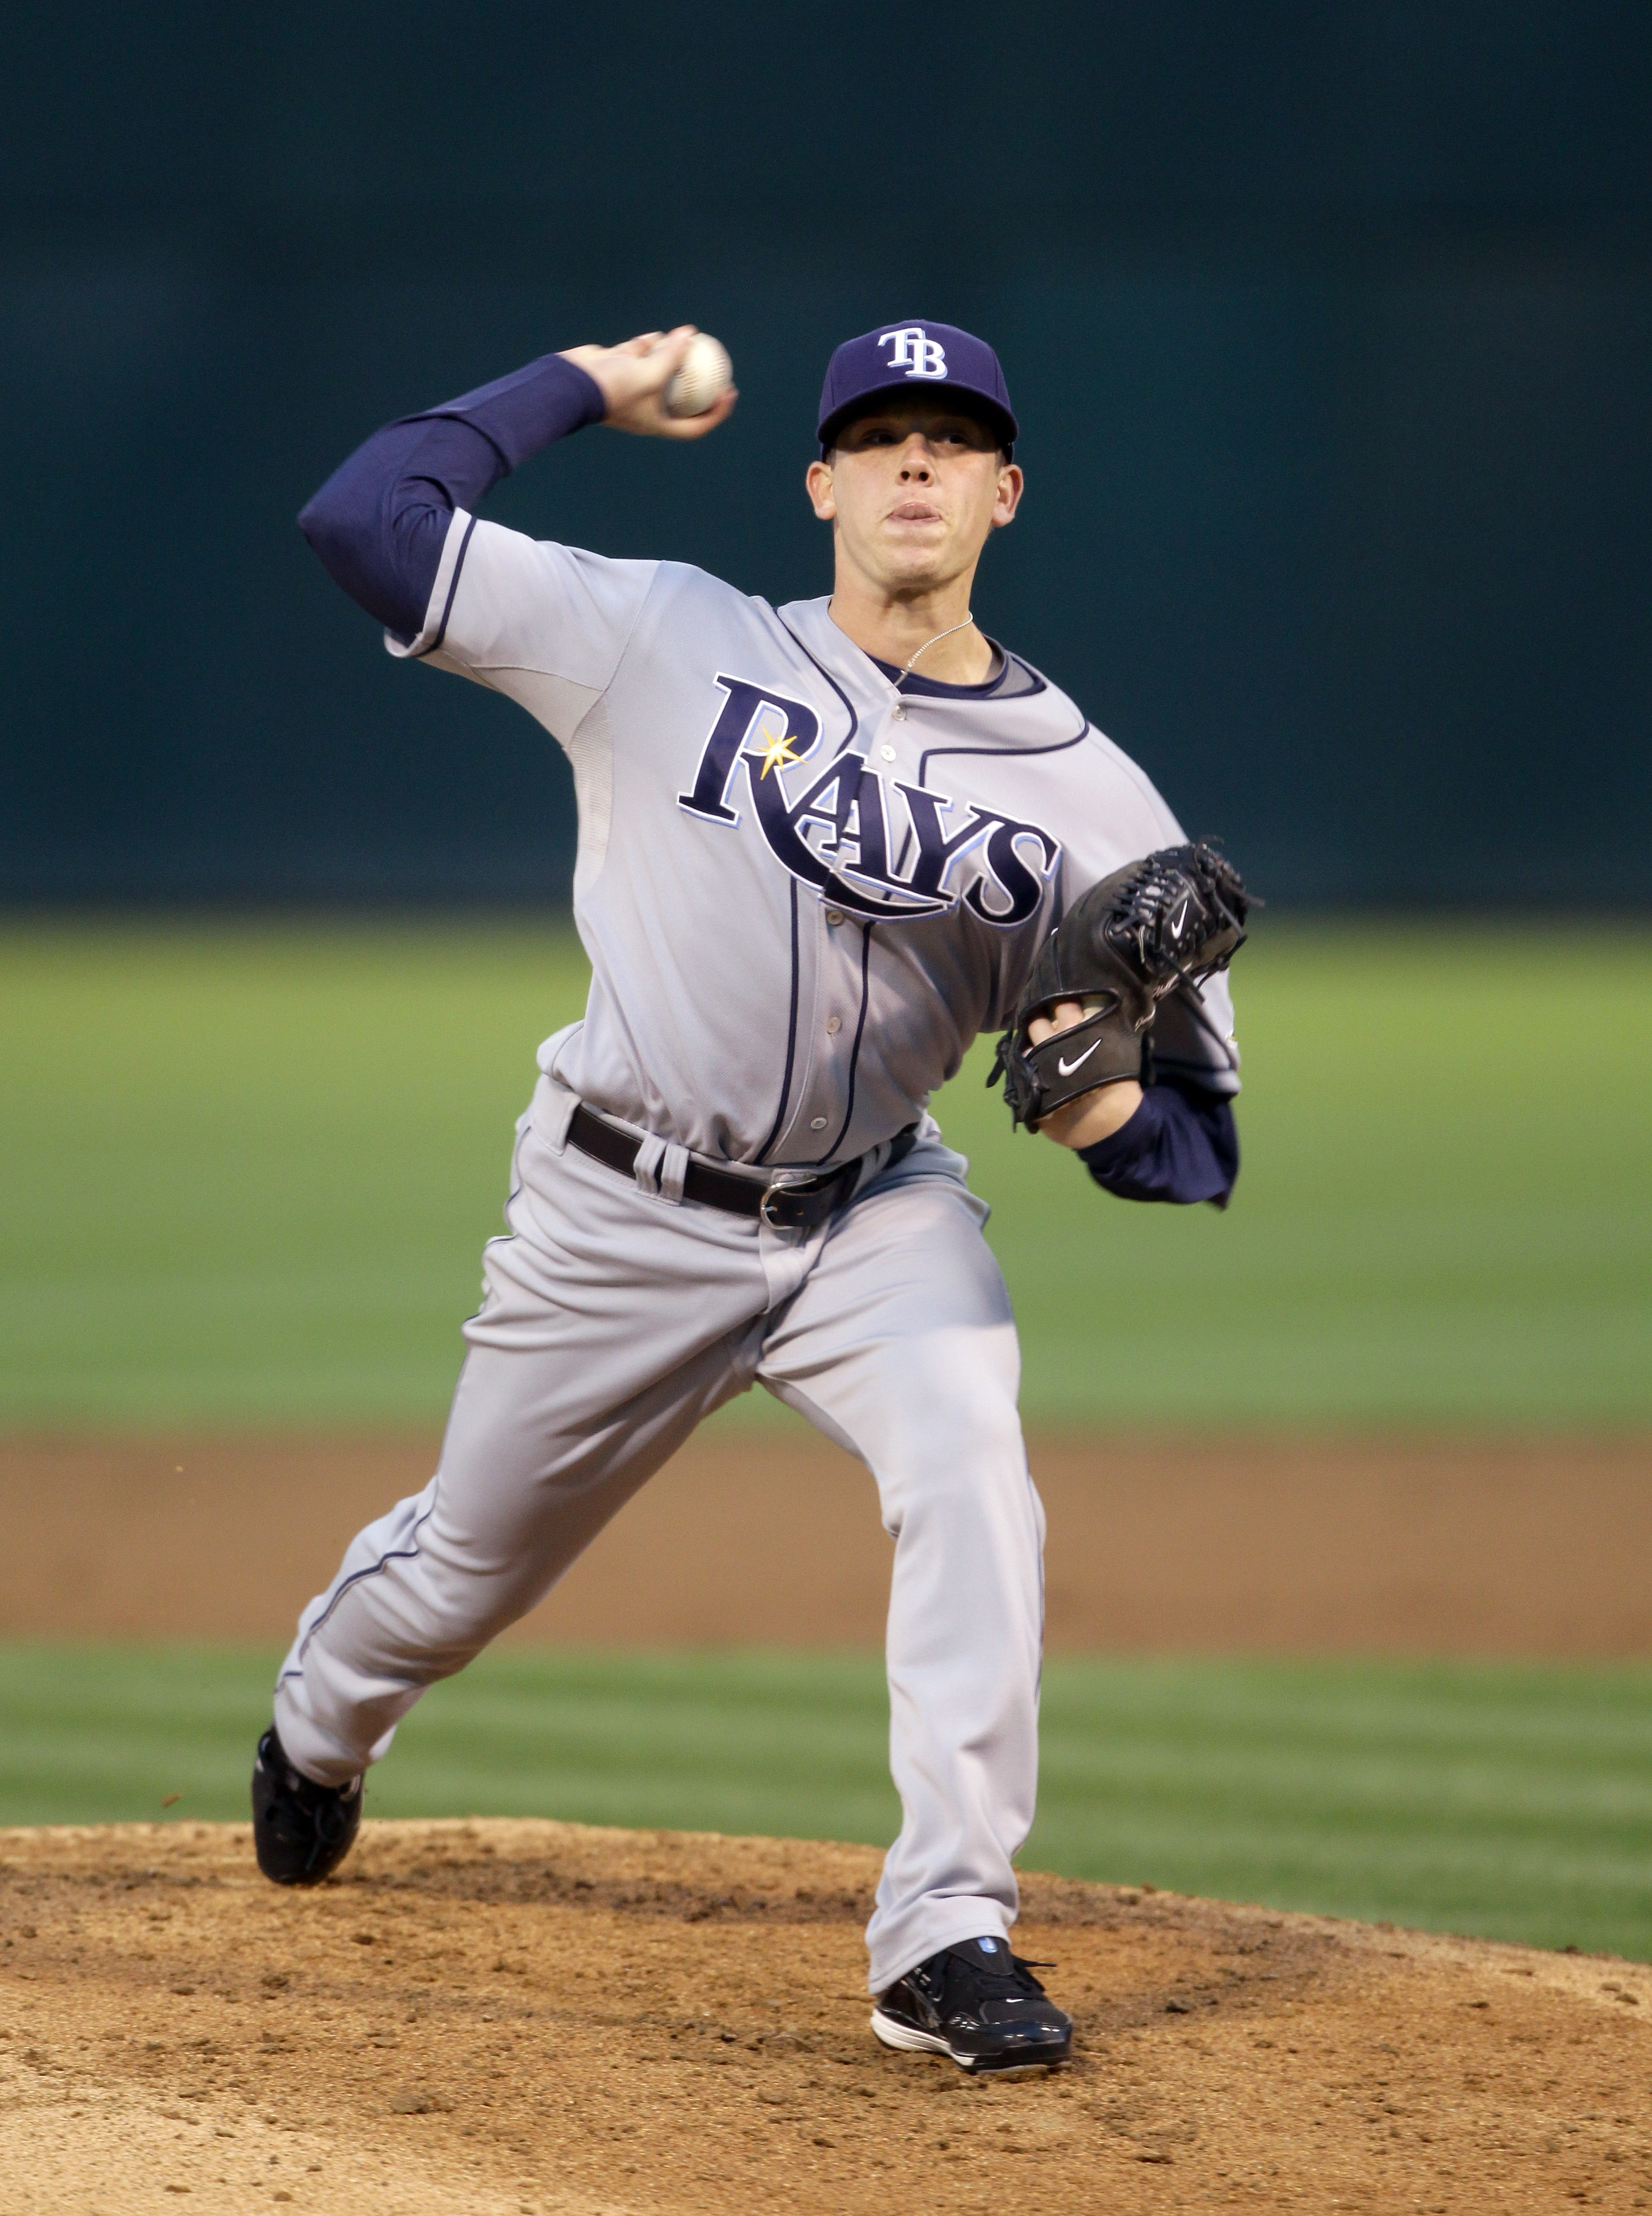 Hellickson will position himself as one of the top pitchers in the Rays rotation